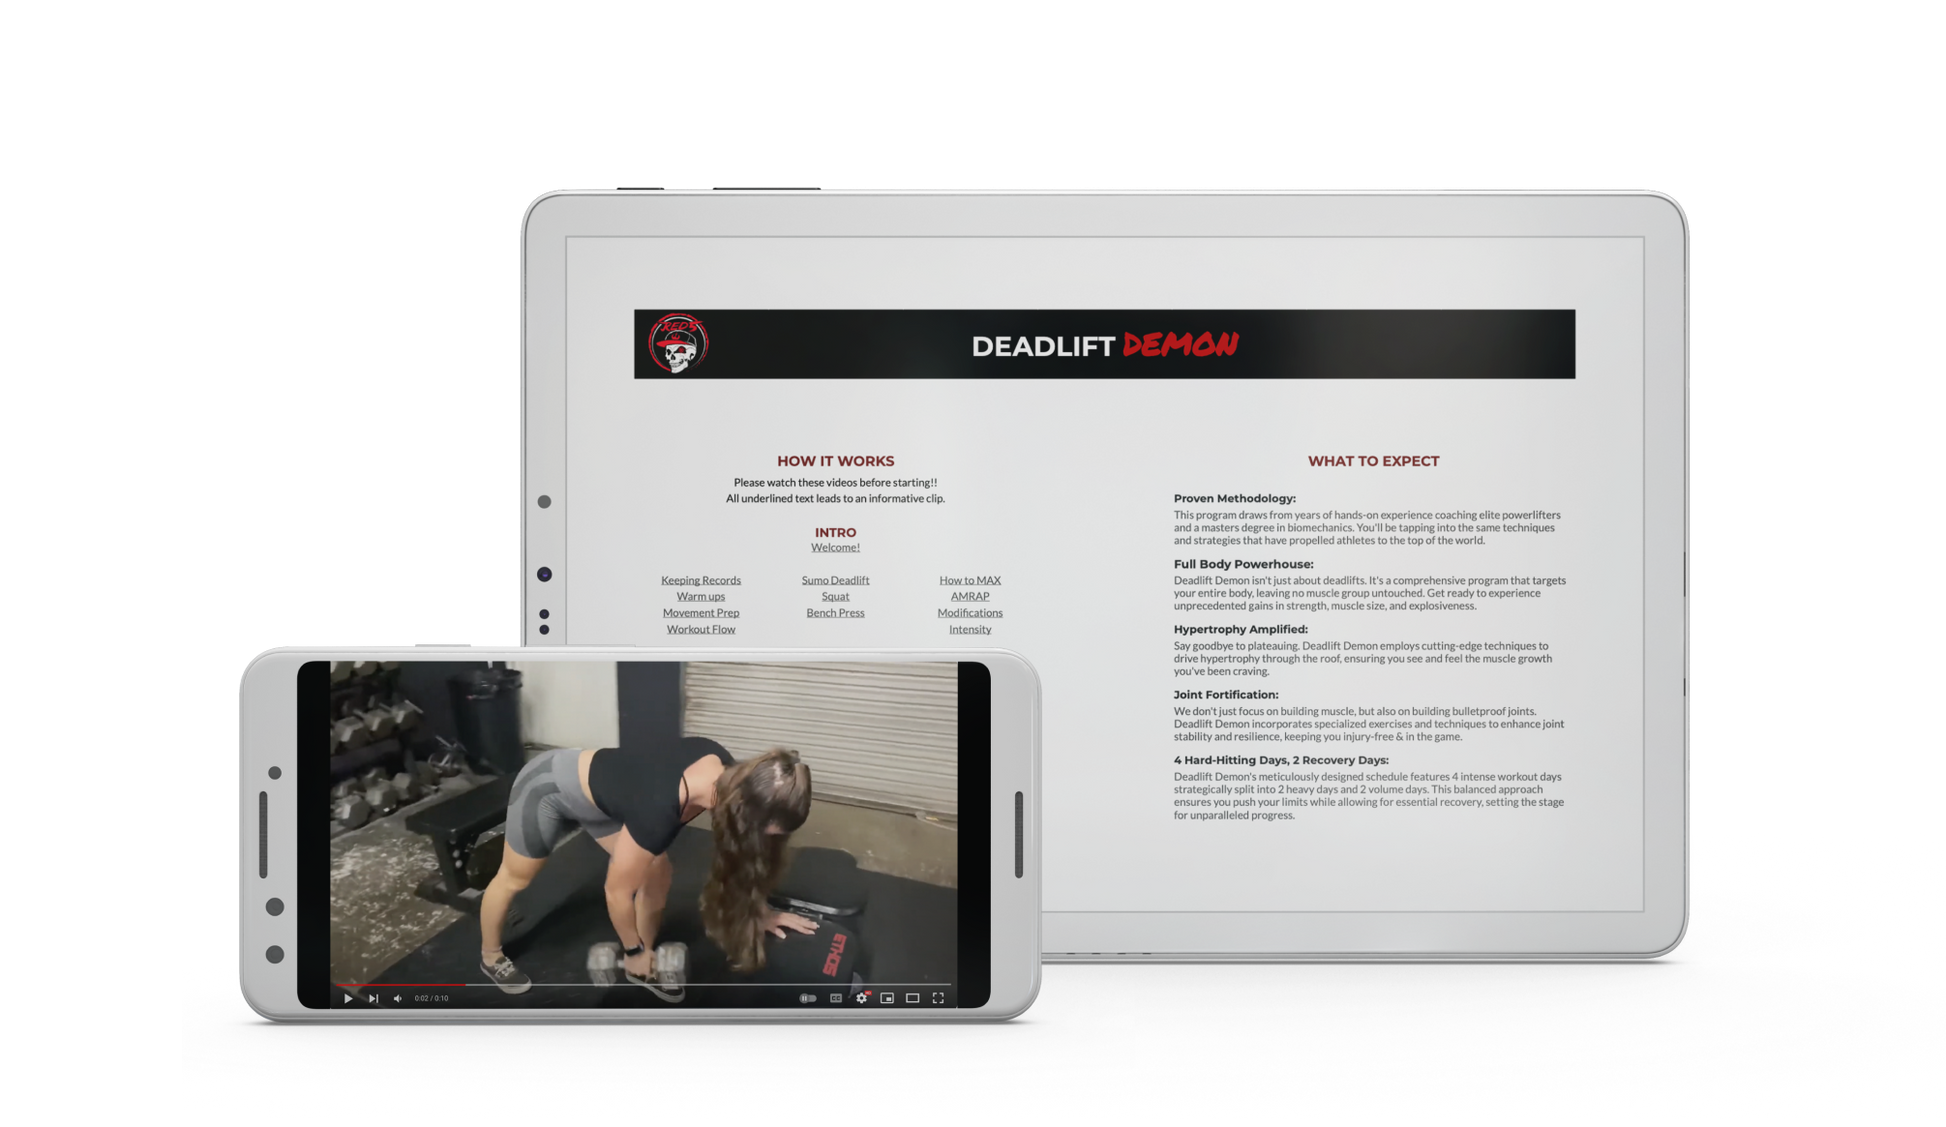 Deadlift Demon Intro on tablet with Mobile video exaxmple